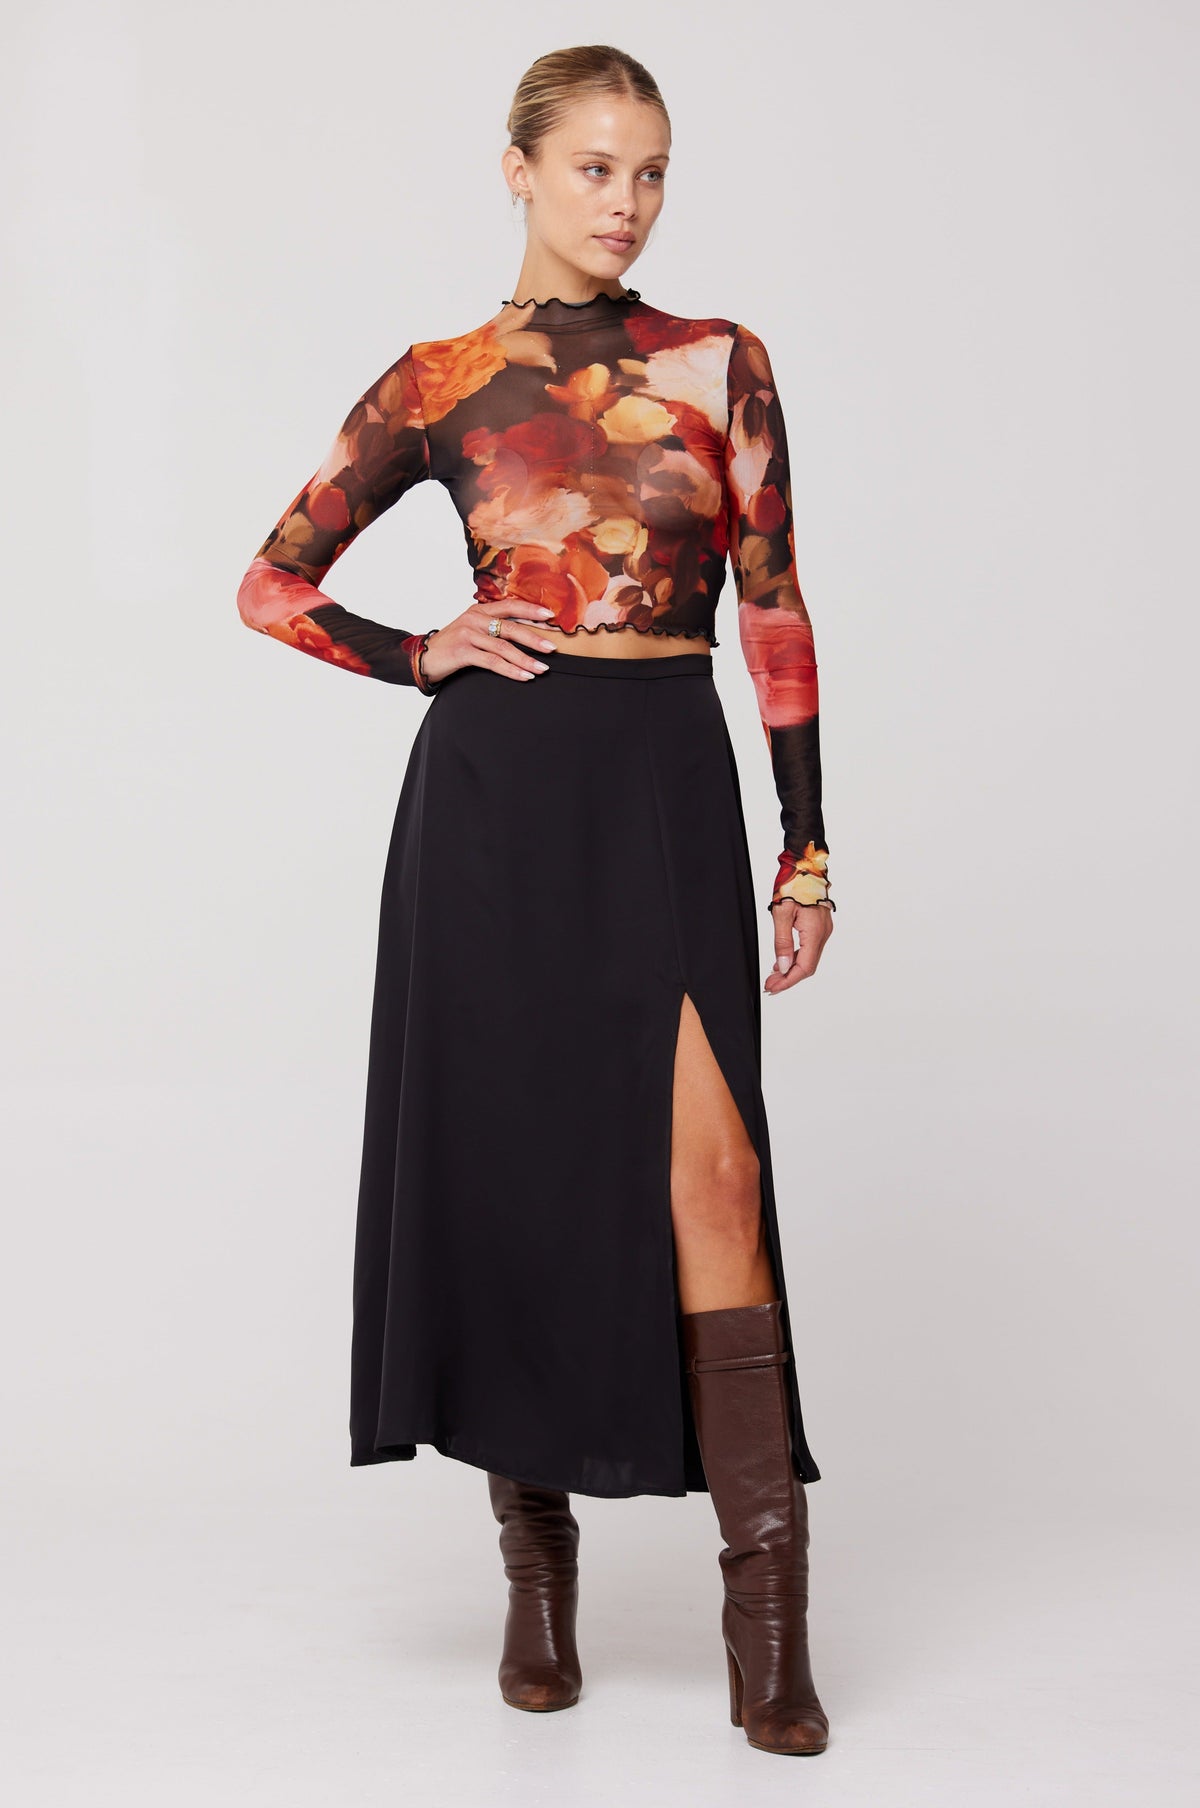 This is an image of Skatie Midi Skirt in Black - RESA featuring a model wearing the dress